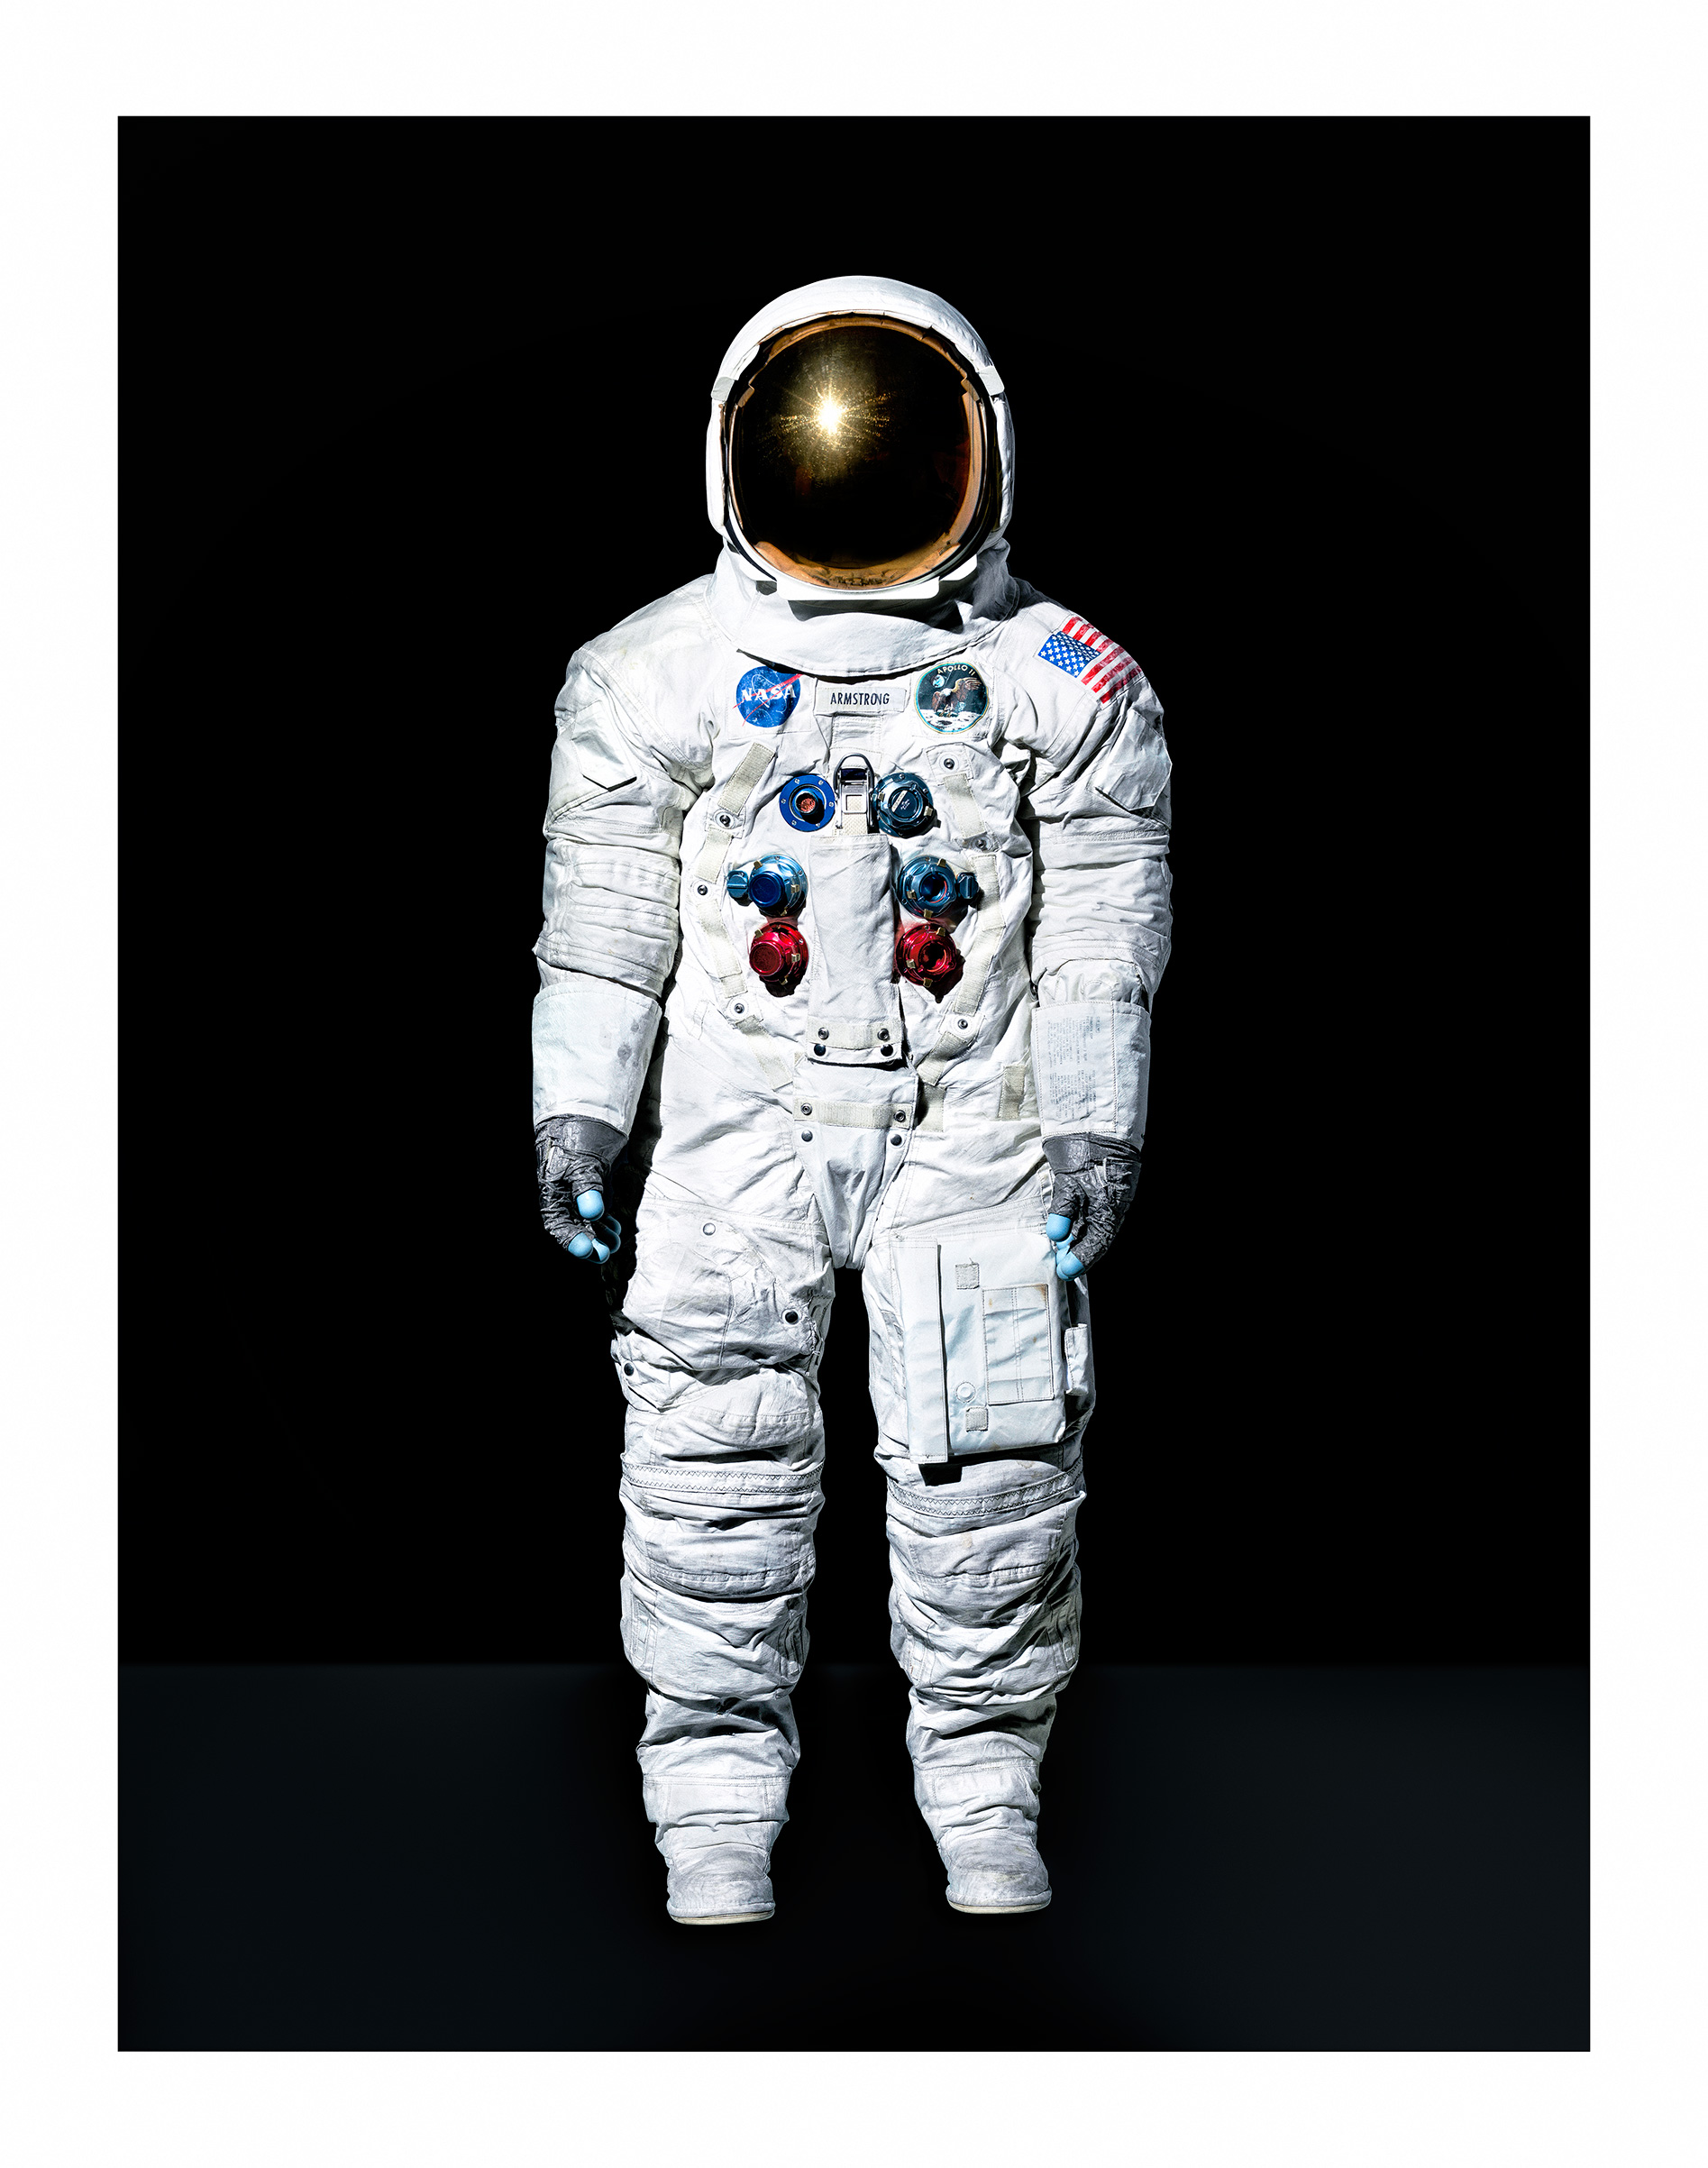 Neil Armstongs suit from the Apollo 1 mission